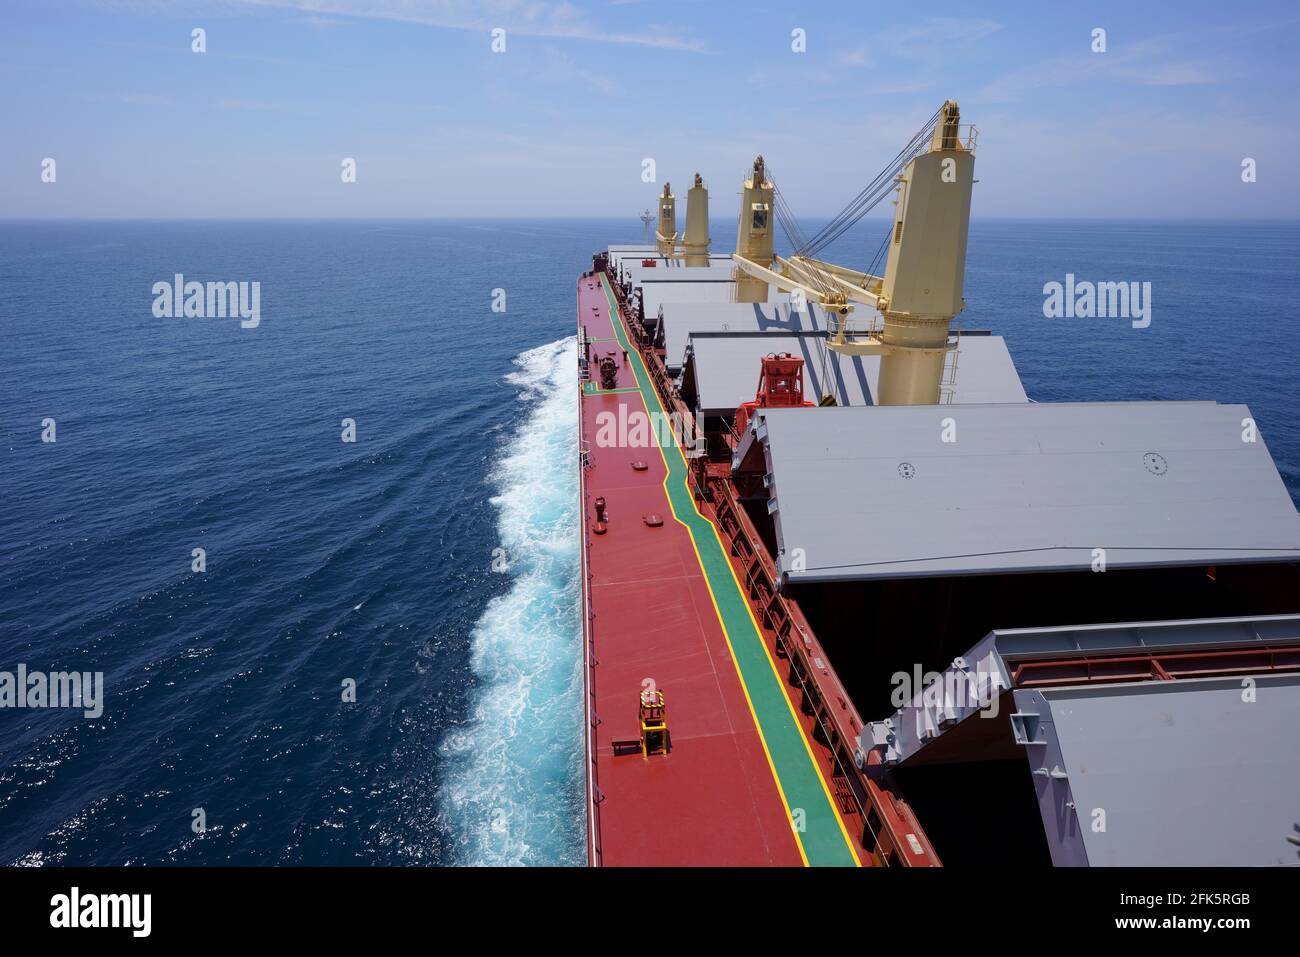 bulk-carrier-proceeding-loading-port-with-open-holds-stock-photo-alamy